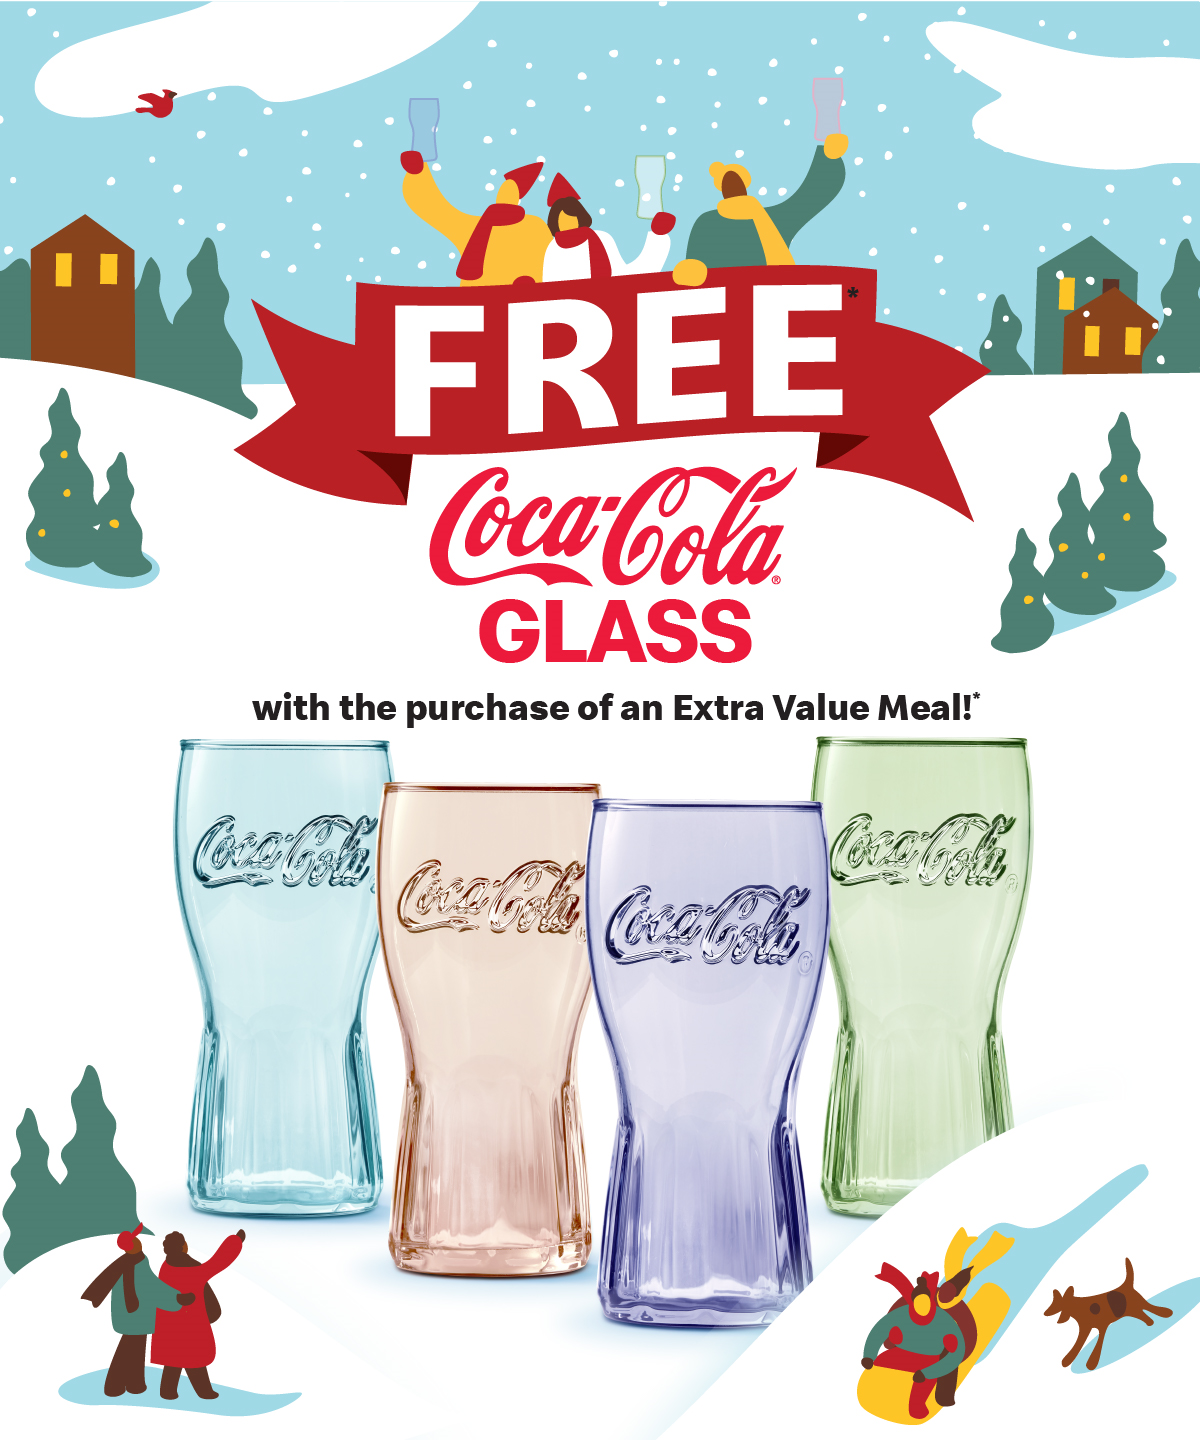 Free Coca-Cola® Glass with the purchase of an Extra Value Meal!*